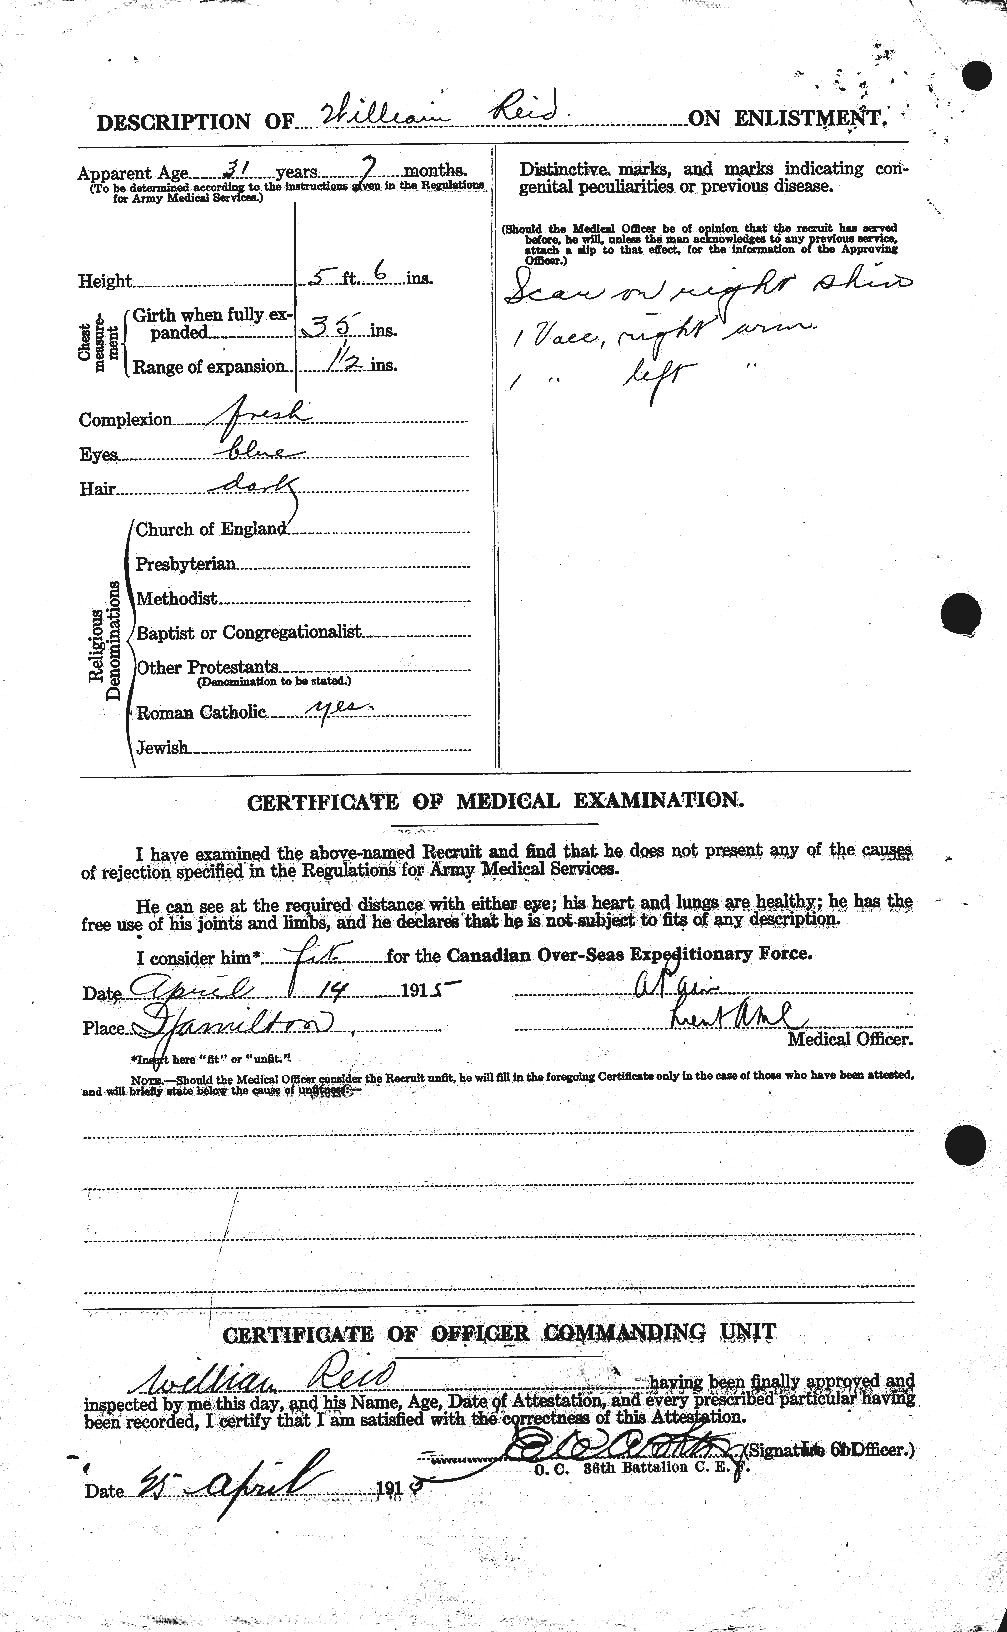 Personnel Records of the First World War - CEF 596953b